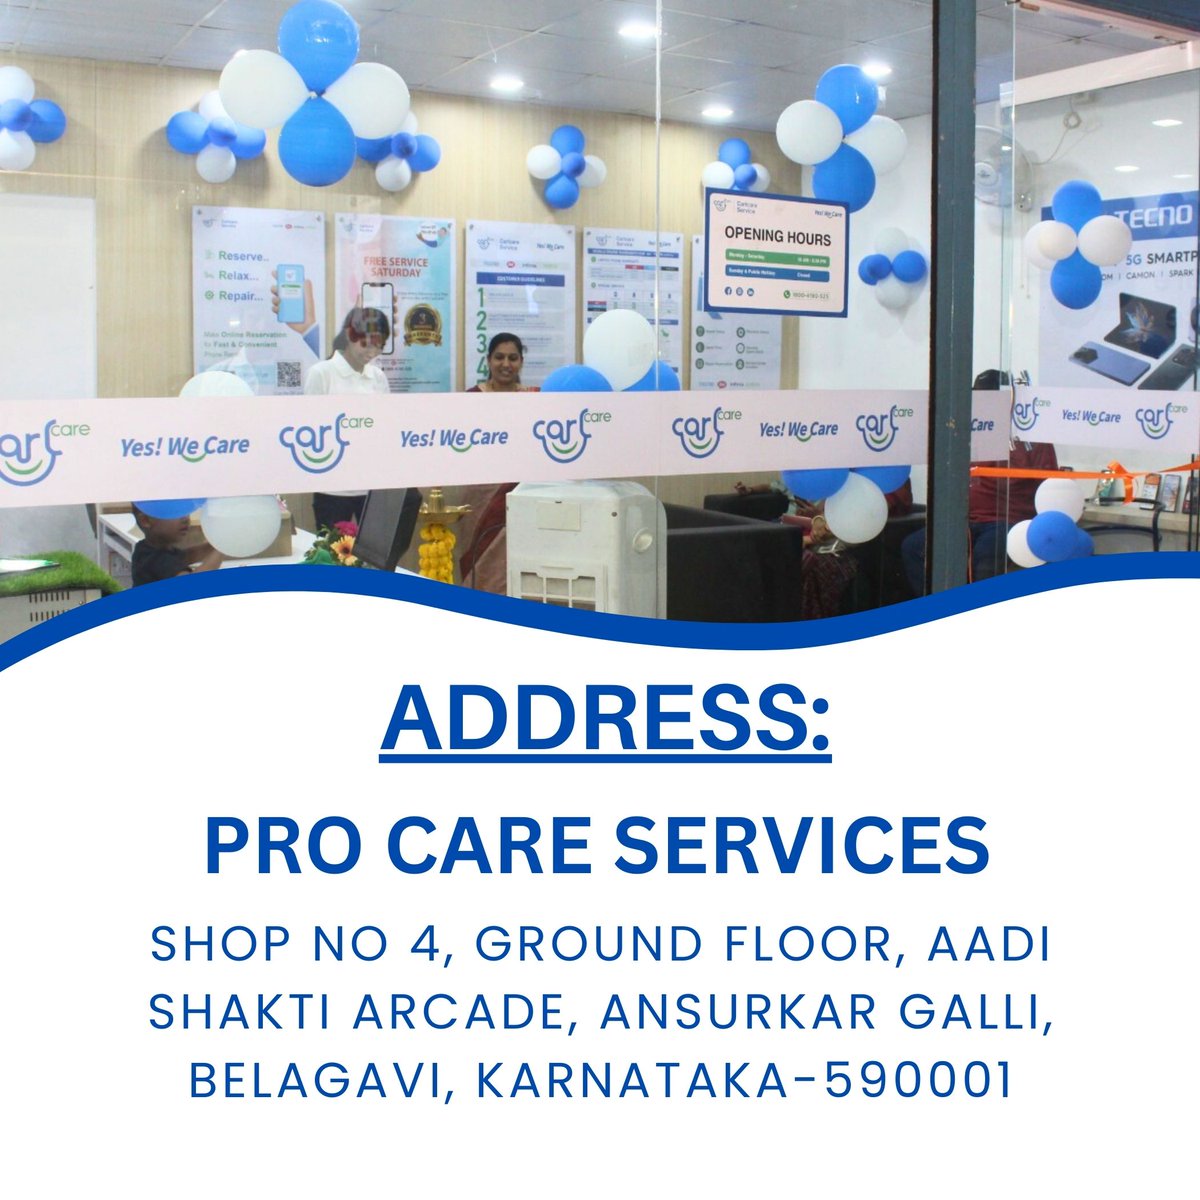 We're thrilled to announce the grand opening of the Tecno Authorized Service Centre, powered by Carlcare Service. Now, experience top-notch repairs and service for your Tecno devices in Belagavi, Karnataka.

#tecnoservicecentre #CarlcareService #YesWeCare #mobile #Karnataka